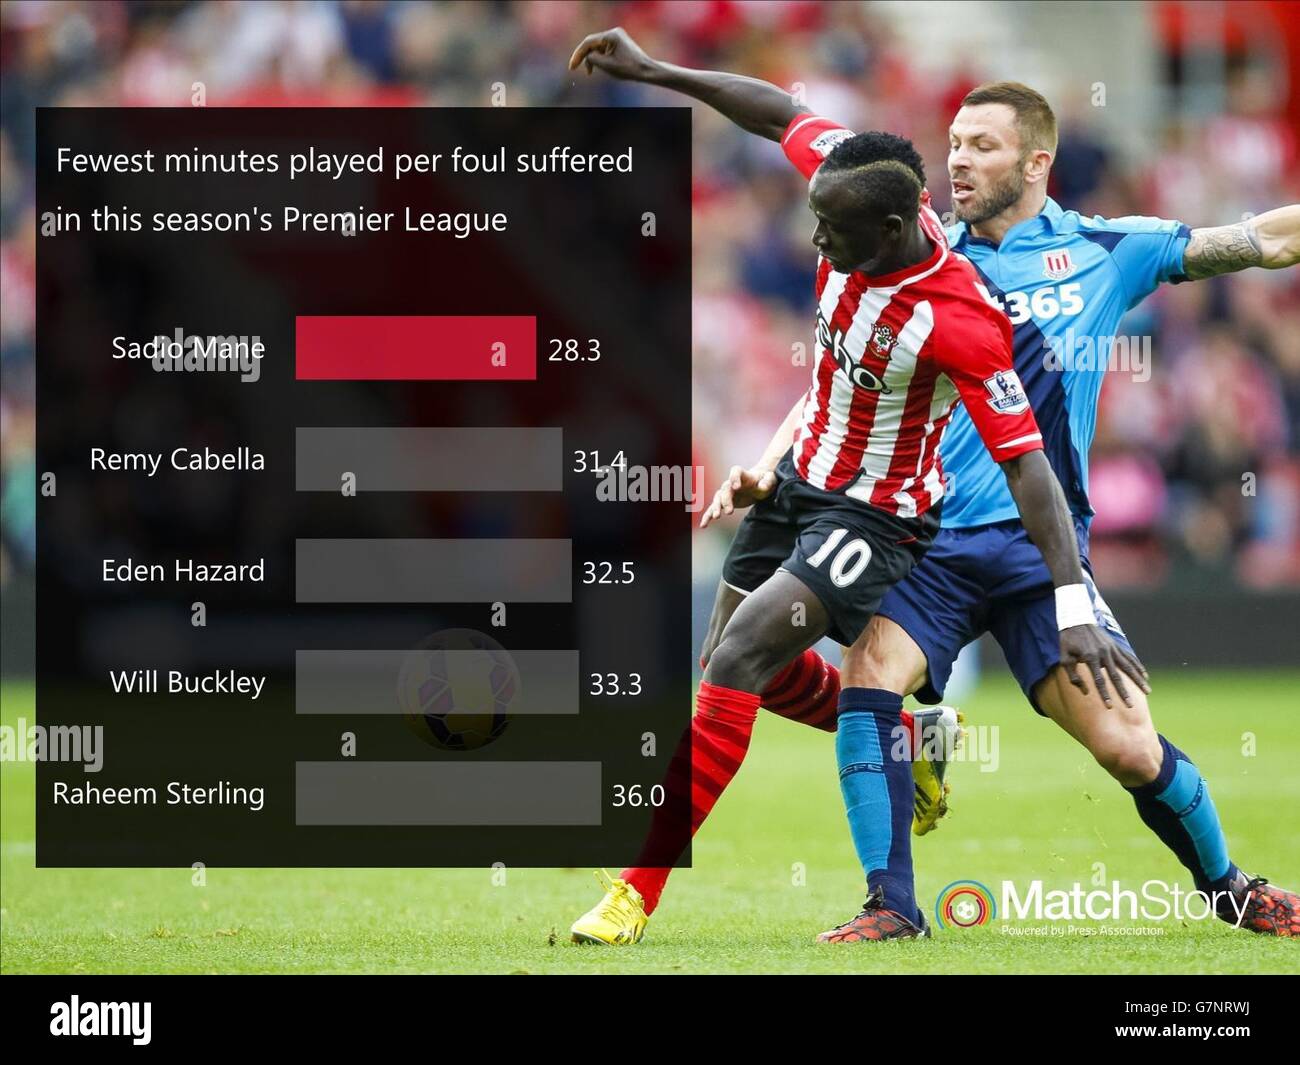 Soccer - Match Story Engine Room Graphic. A Match Story graphic showing the fewest minutes played per foul suffered in this season's Premier League. Stock Photo